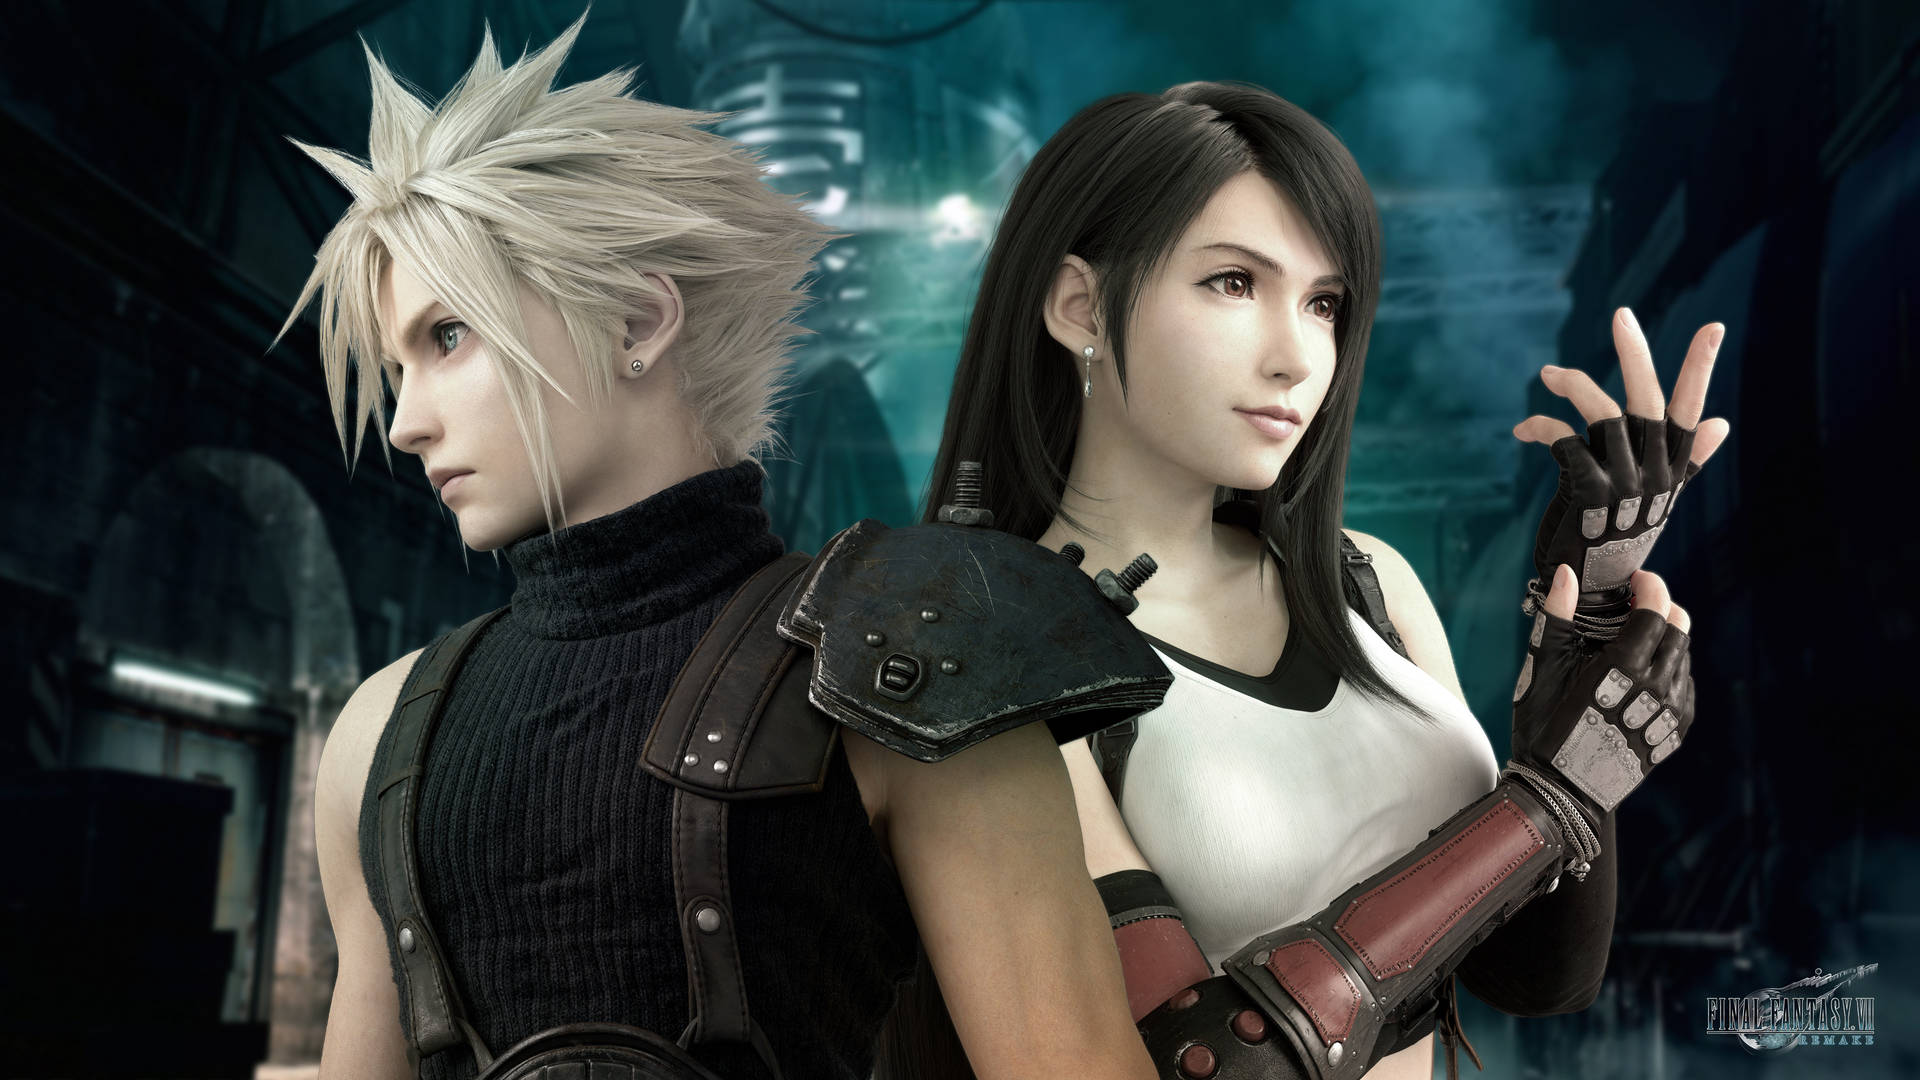 3840X2160 Ff7 Wallpaper and Background